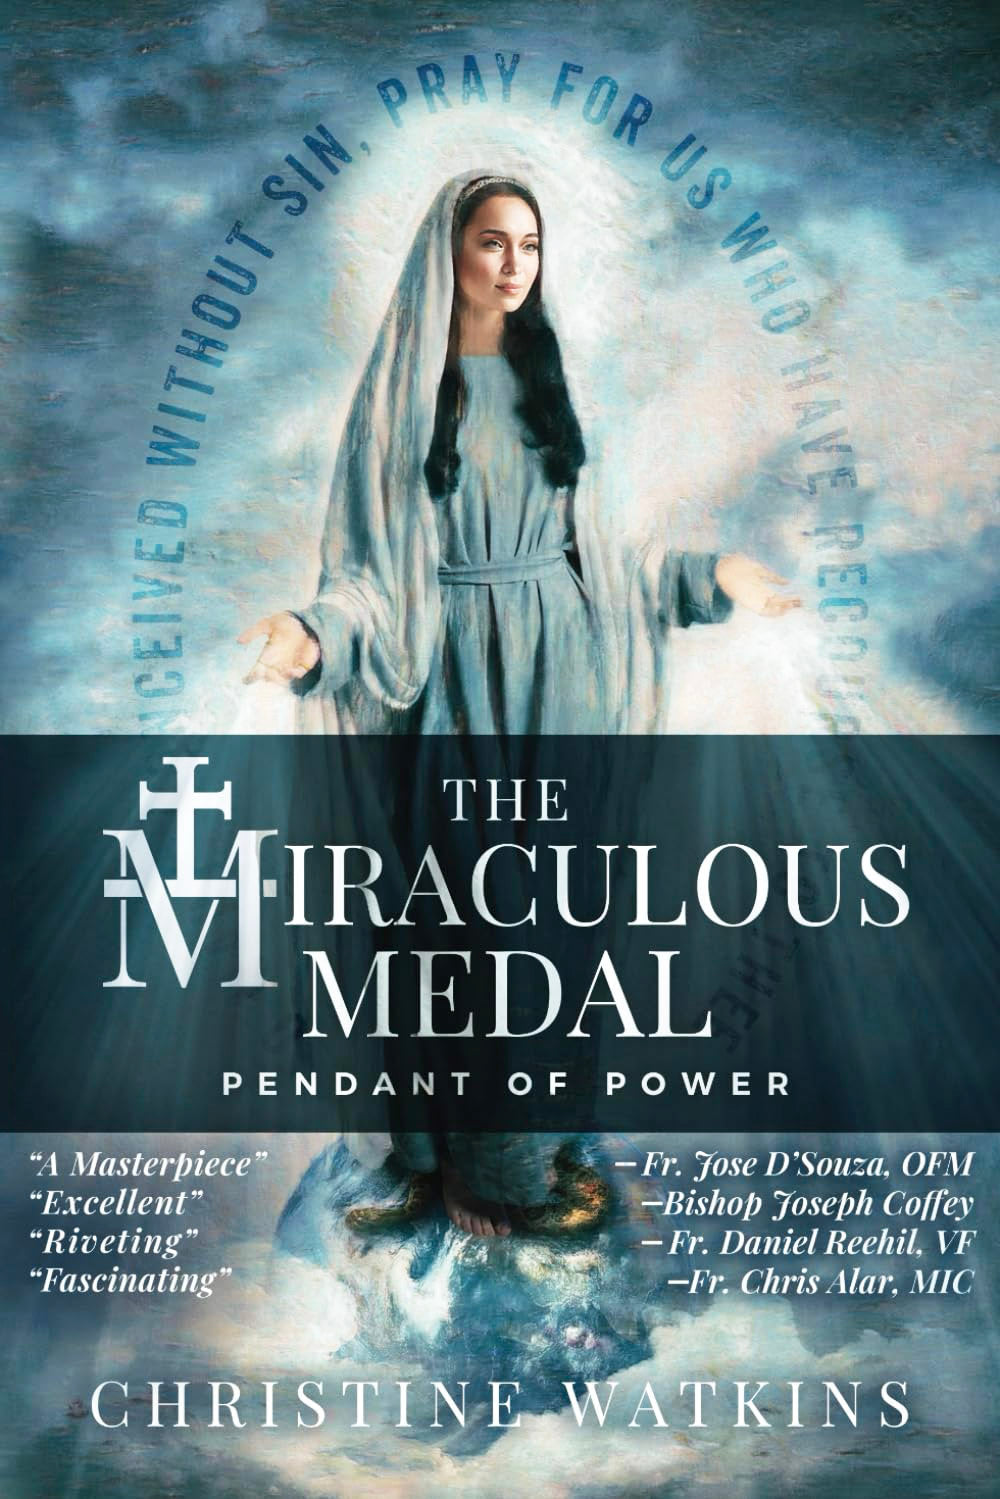 The Miraculous Medal: Pendant of Power by Christine Watkins